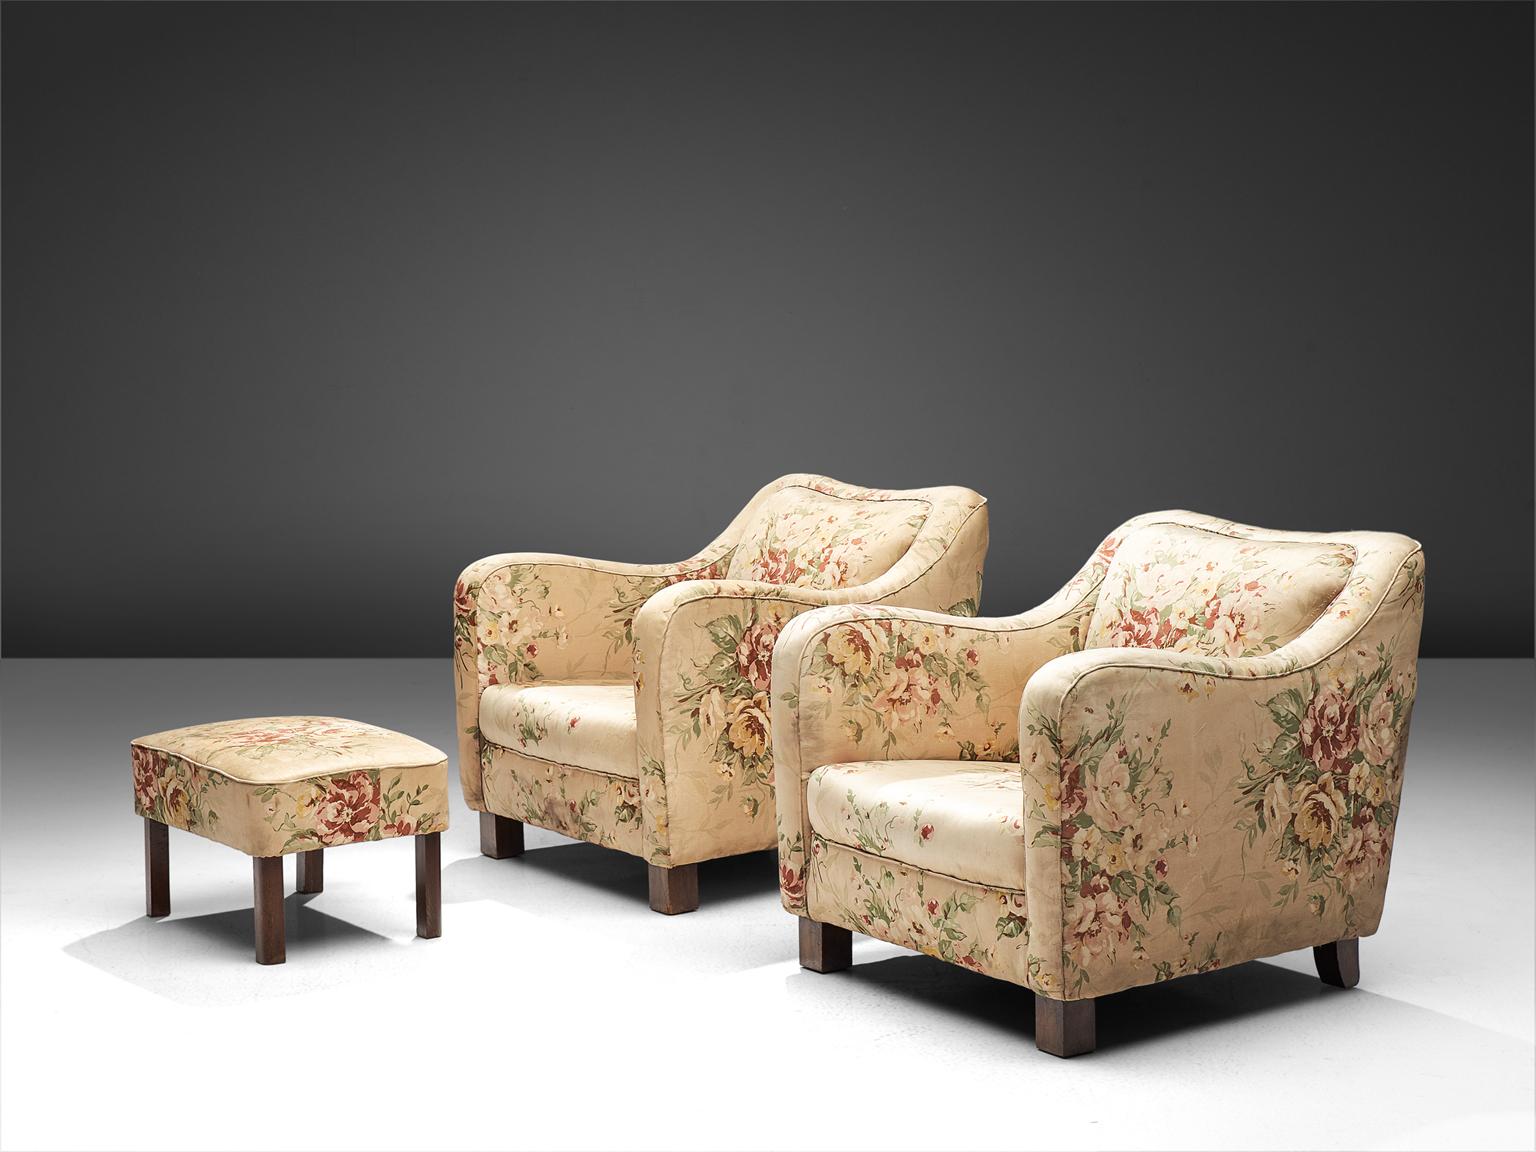 Melchiorre Bega, armchairs and ottoman, Italy, circa 1935 

This pair of padded armchairs come with a footrest of a square design. The set features parallelepiped front legs and back legs in solid oak, and the seat and back is covered in a flower